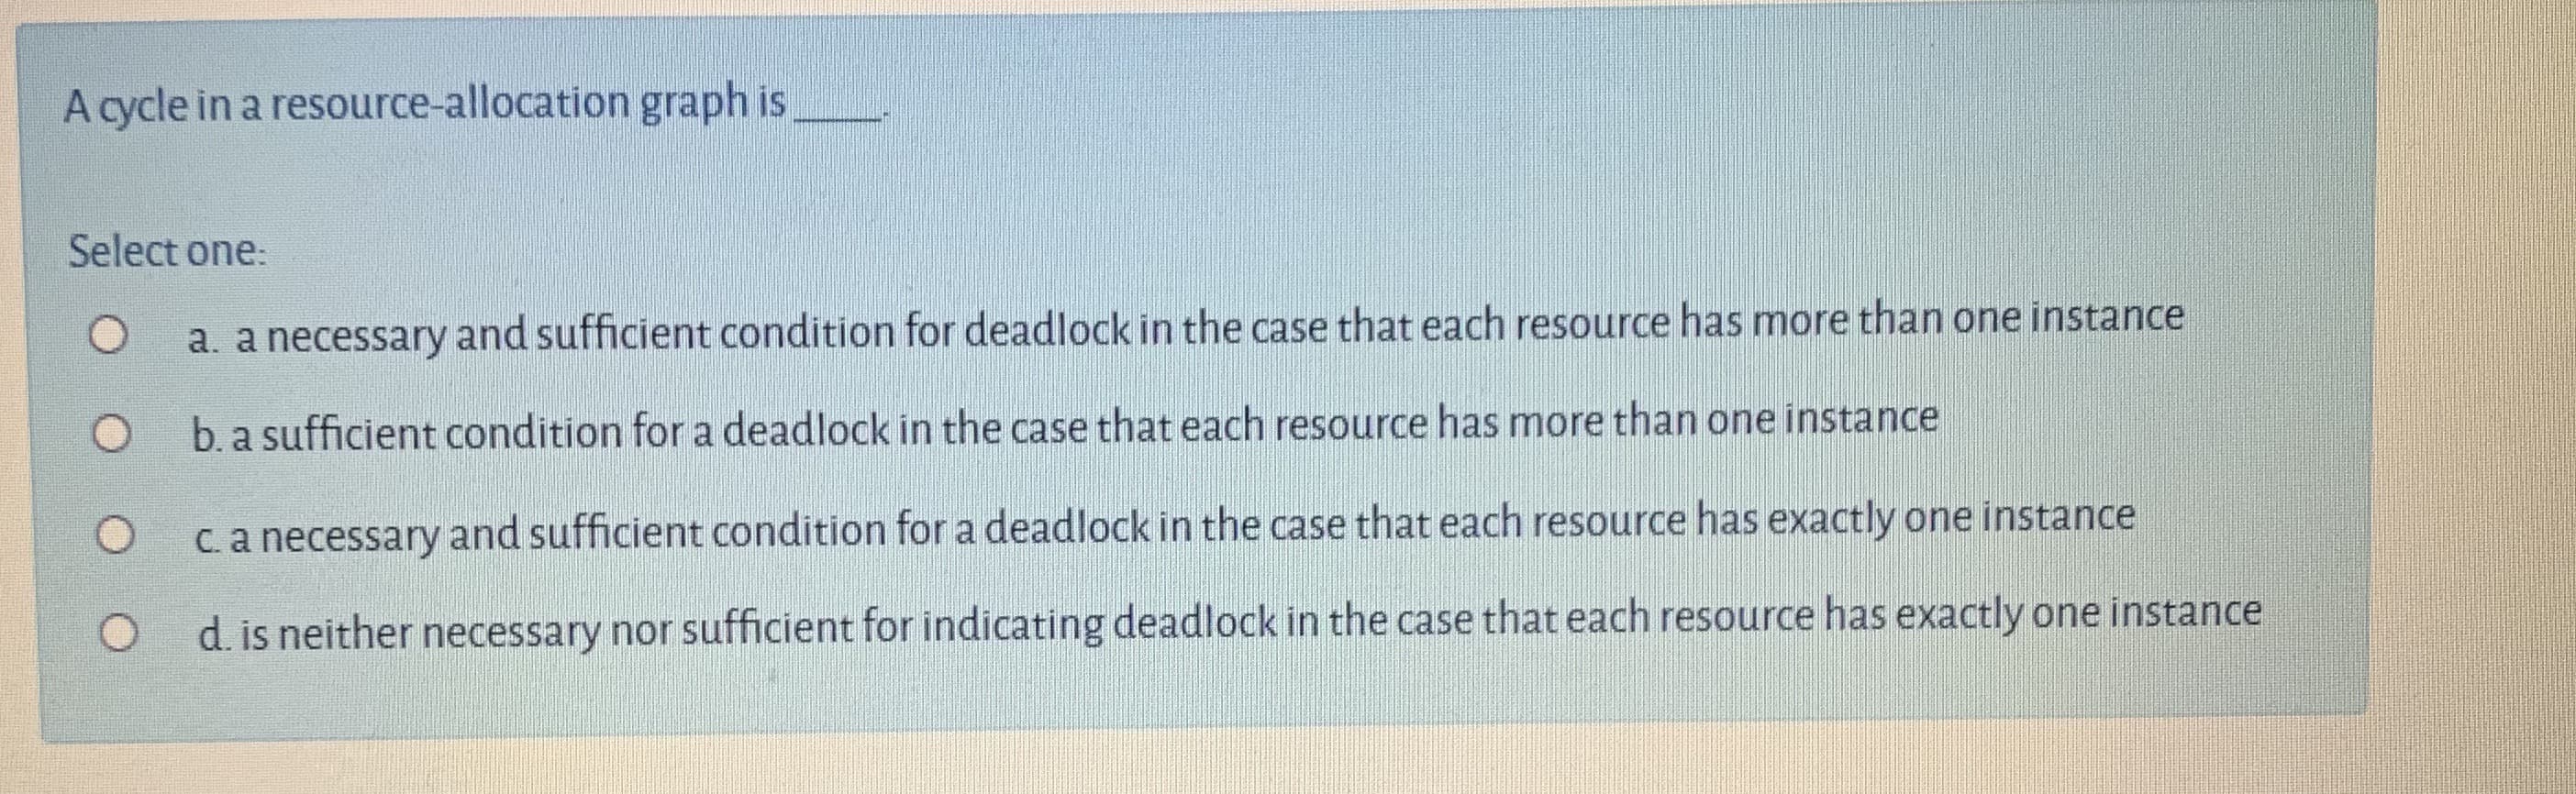 A cycle in a resource-allocation graph is
Select one:
a. a necessary and sufficient condition for deadlock in the case that each resource has more than one instance
b. a sufficient condition for a deadlock in the case that each resource has more than one instance
C.a necessary and sufficient condition for a deadlock in the case that each resource has exactly one instance
d. is neither necessary nor sufficient for indicating deadlock in the case that each resource has exactly one instance
